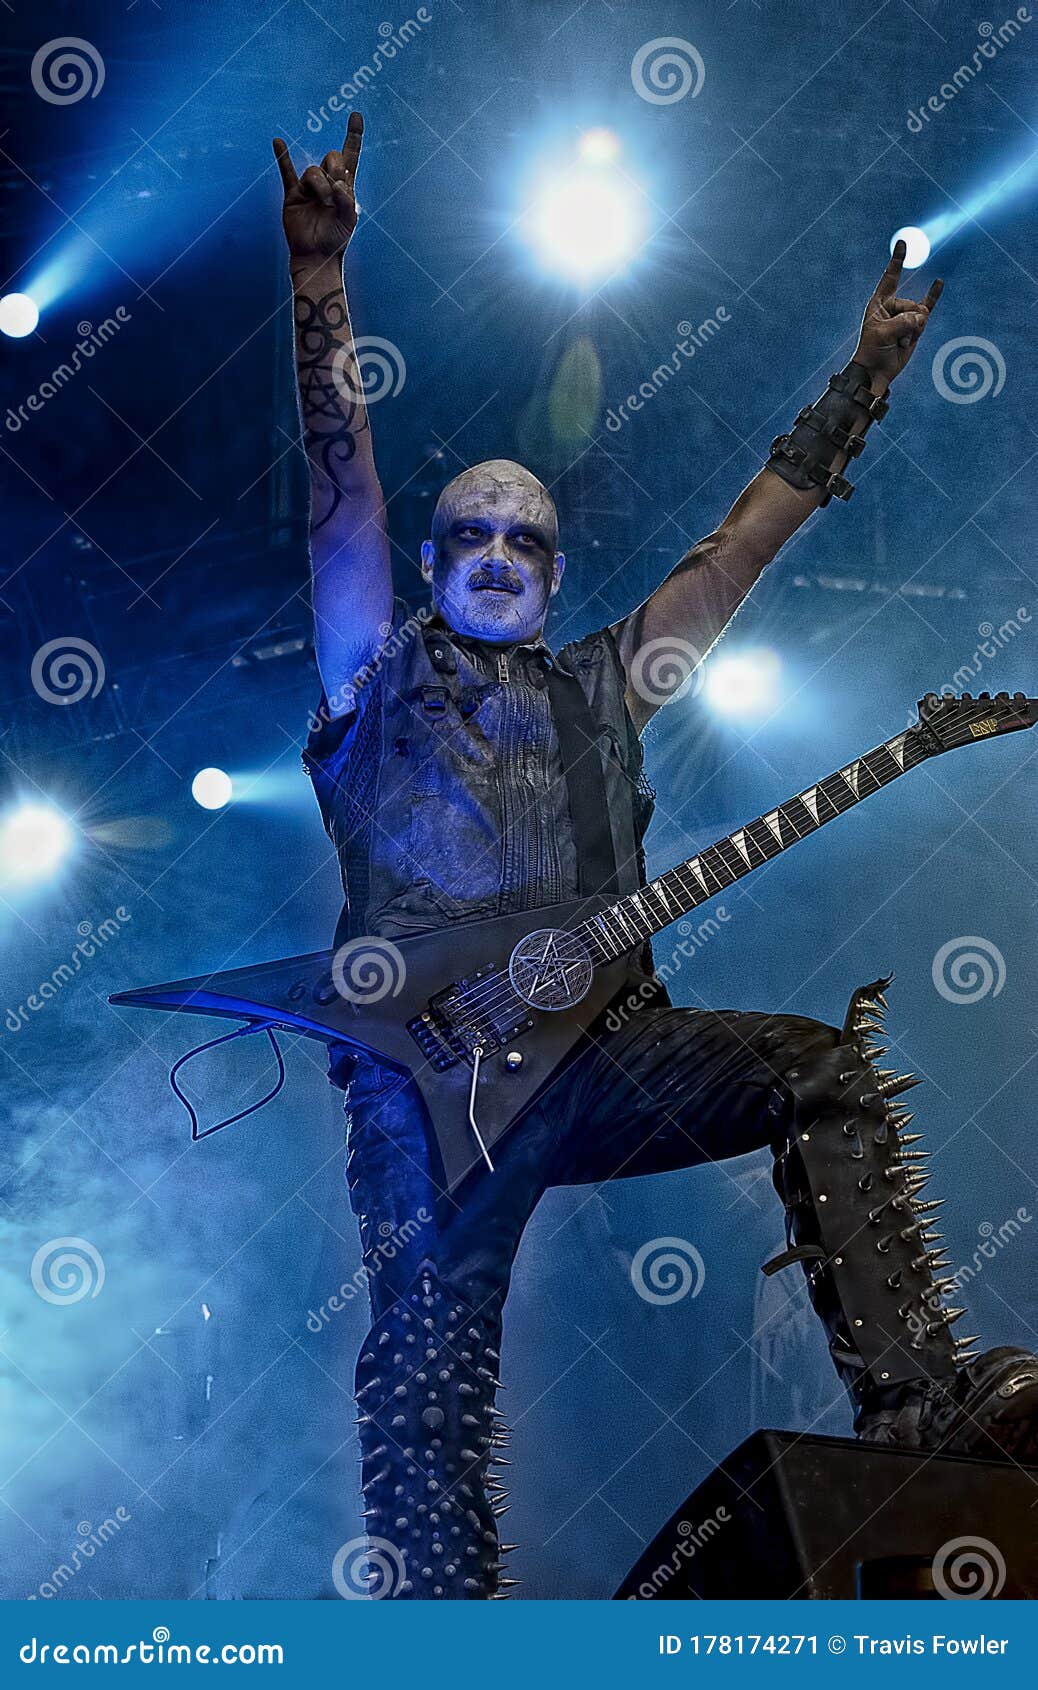 Shagrath of Norwegian metal band Dimmu Borgir performs on stage as News  Photo - Getty Images